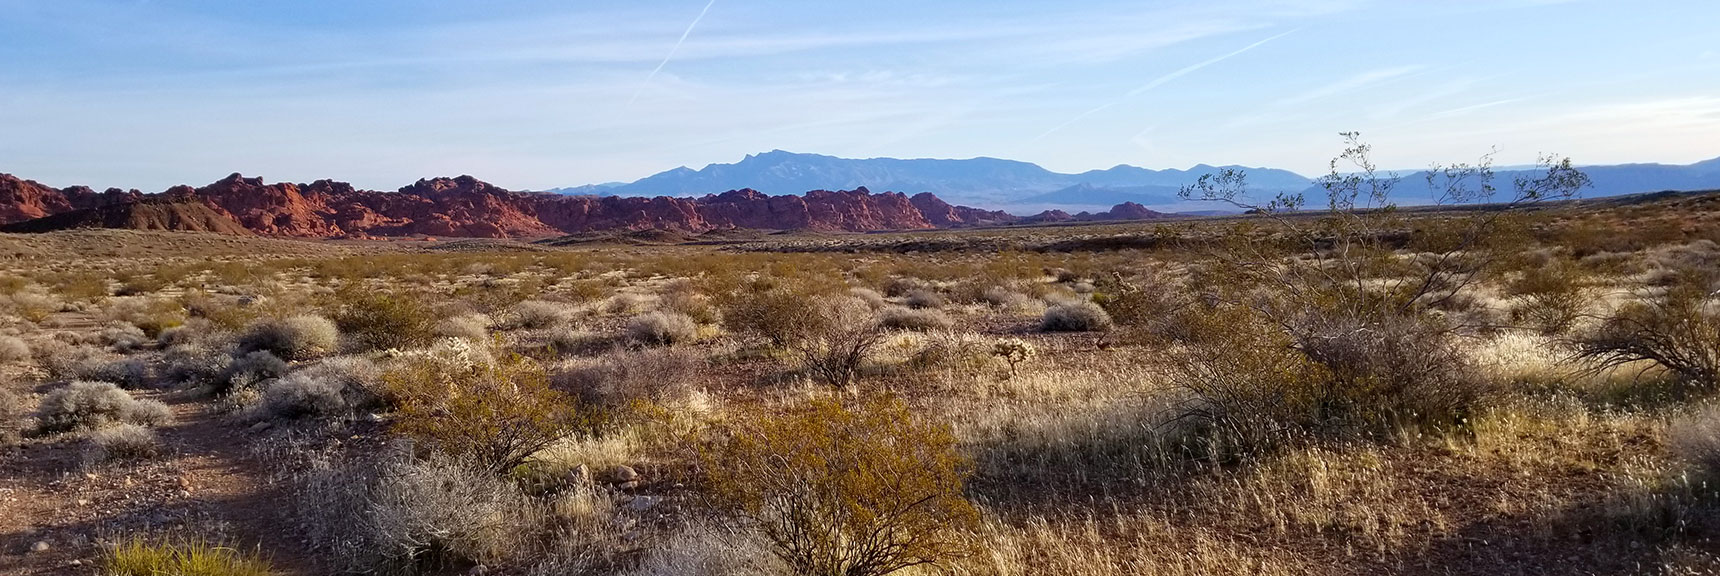 Looking Northeast Down the Length of Red Rock Hills from the West End of Old Arrowhead Trail in Valley of Fire State Park, Nevada